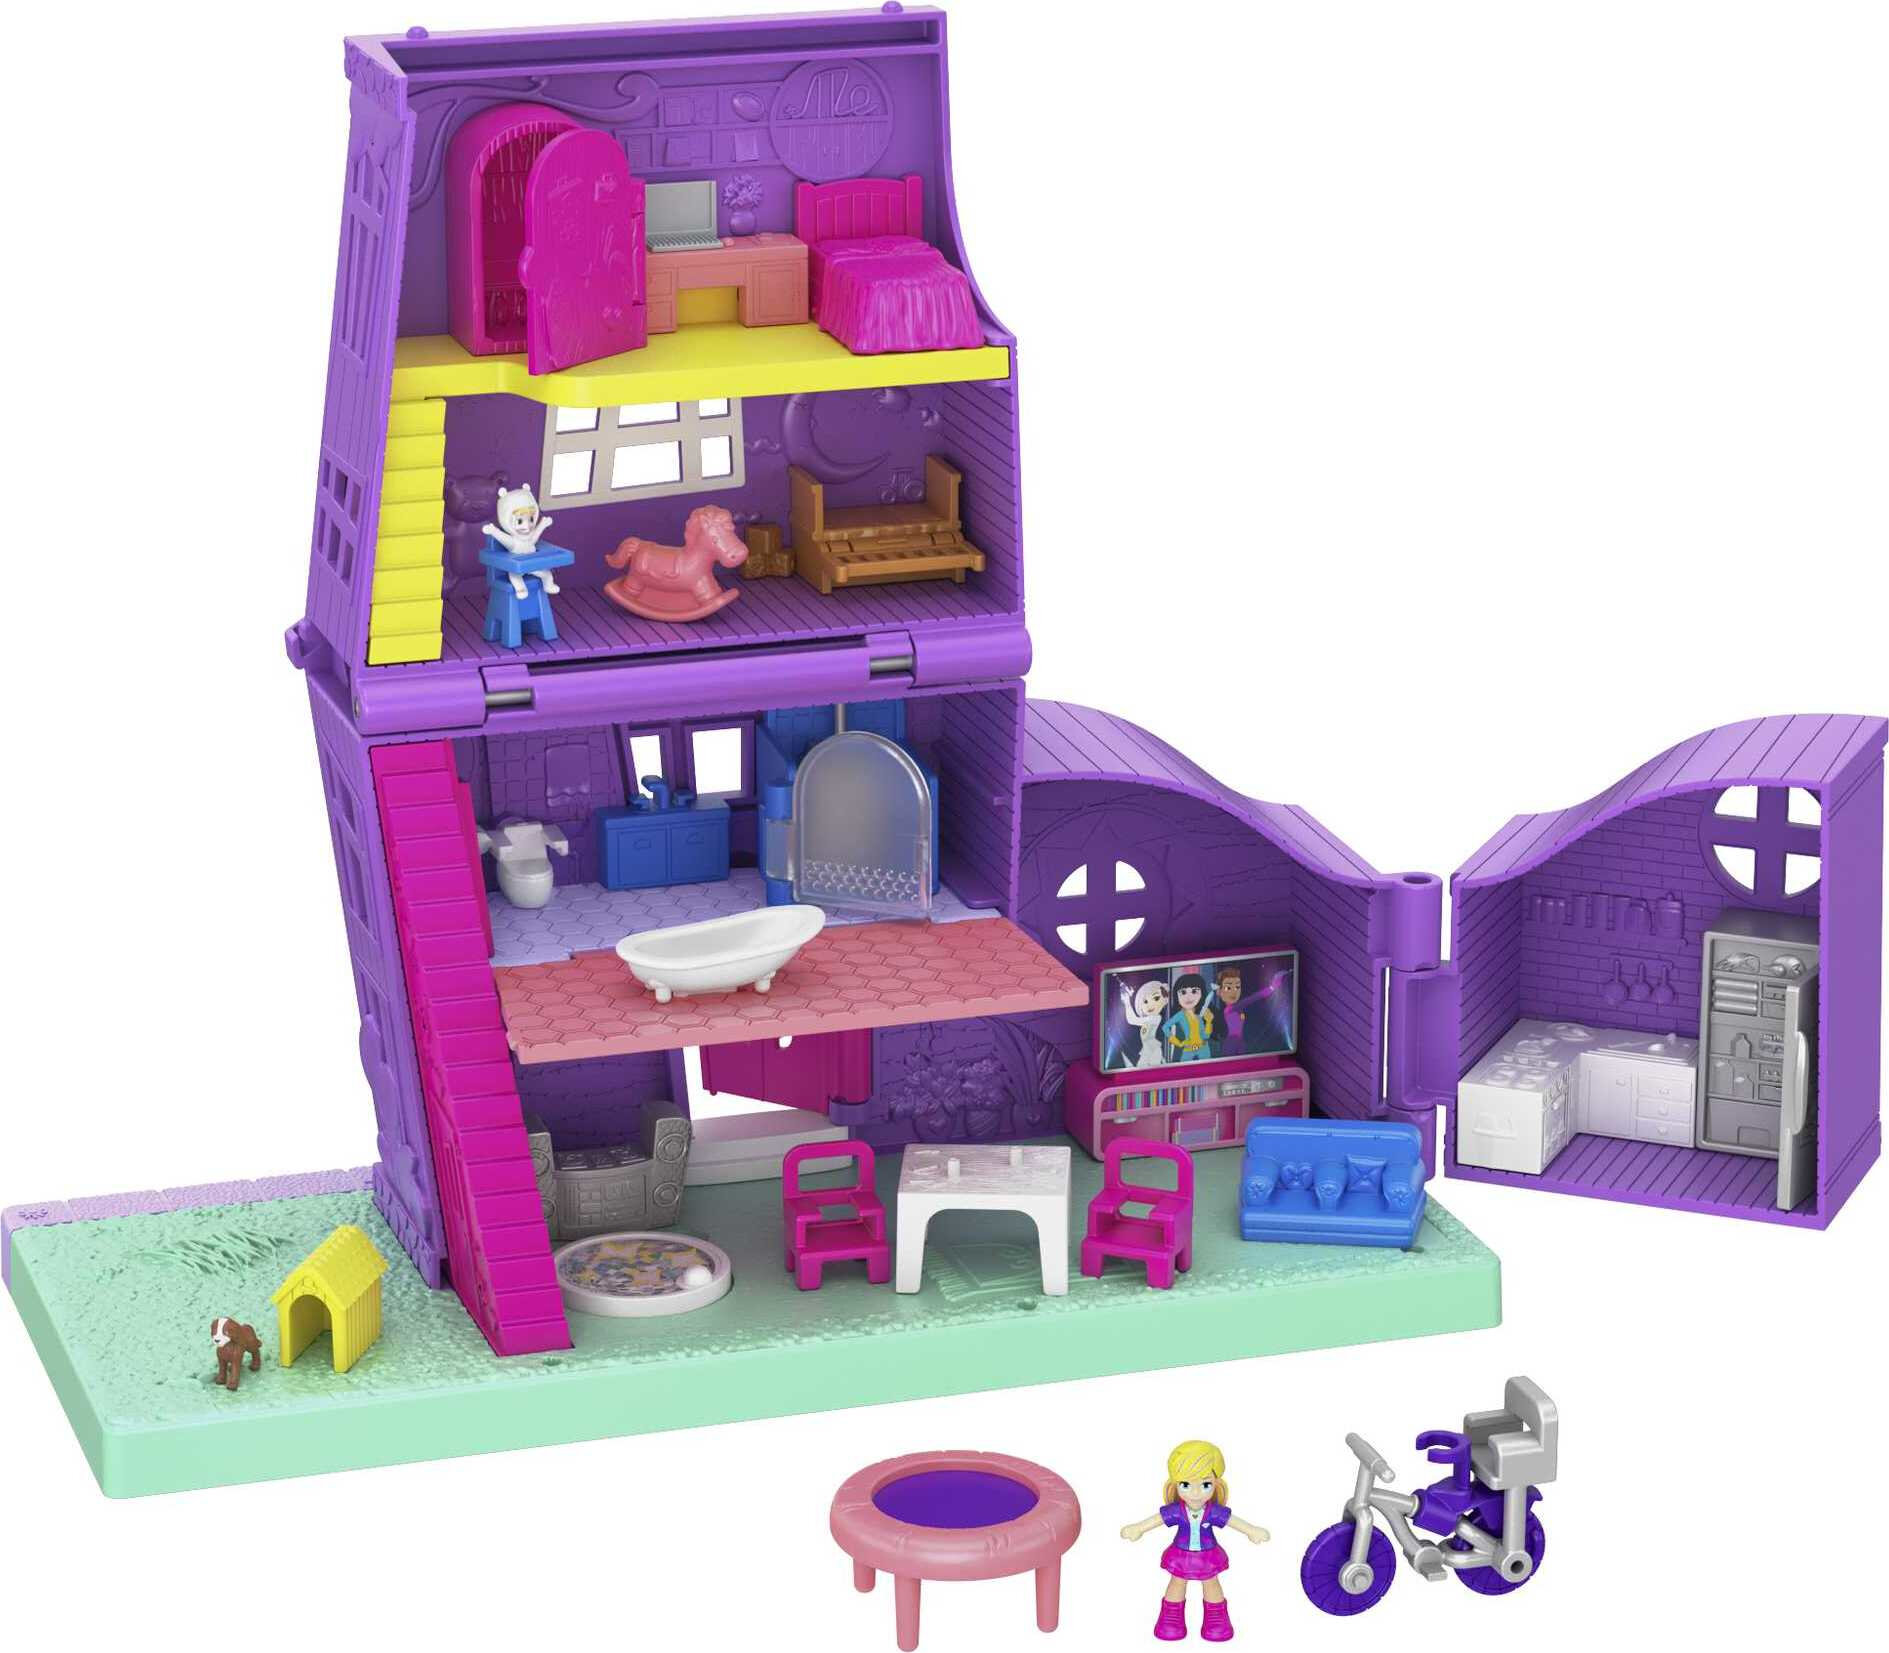 Polly Pocket Pollyville Pocket House Playset, Doll House with Micro Doll, Toy Bike & Furniture Accessories - image 1 of 7